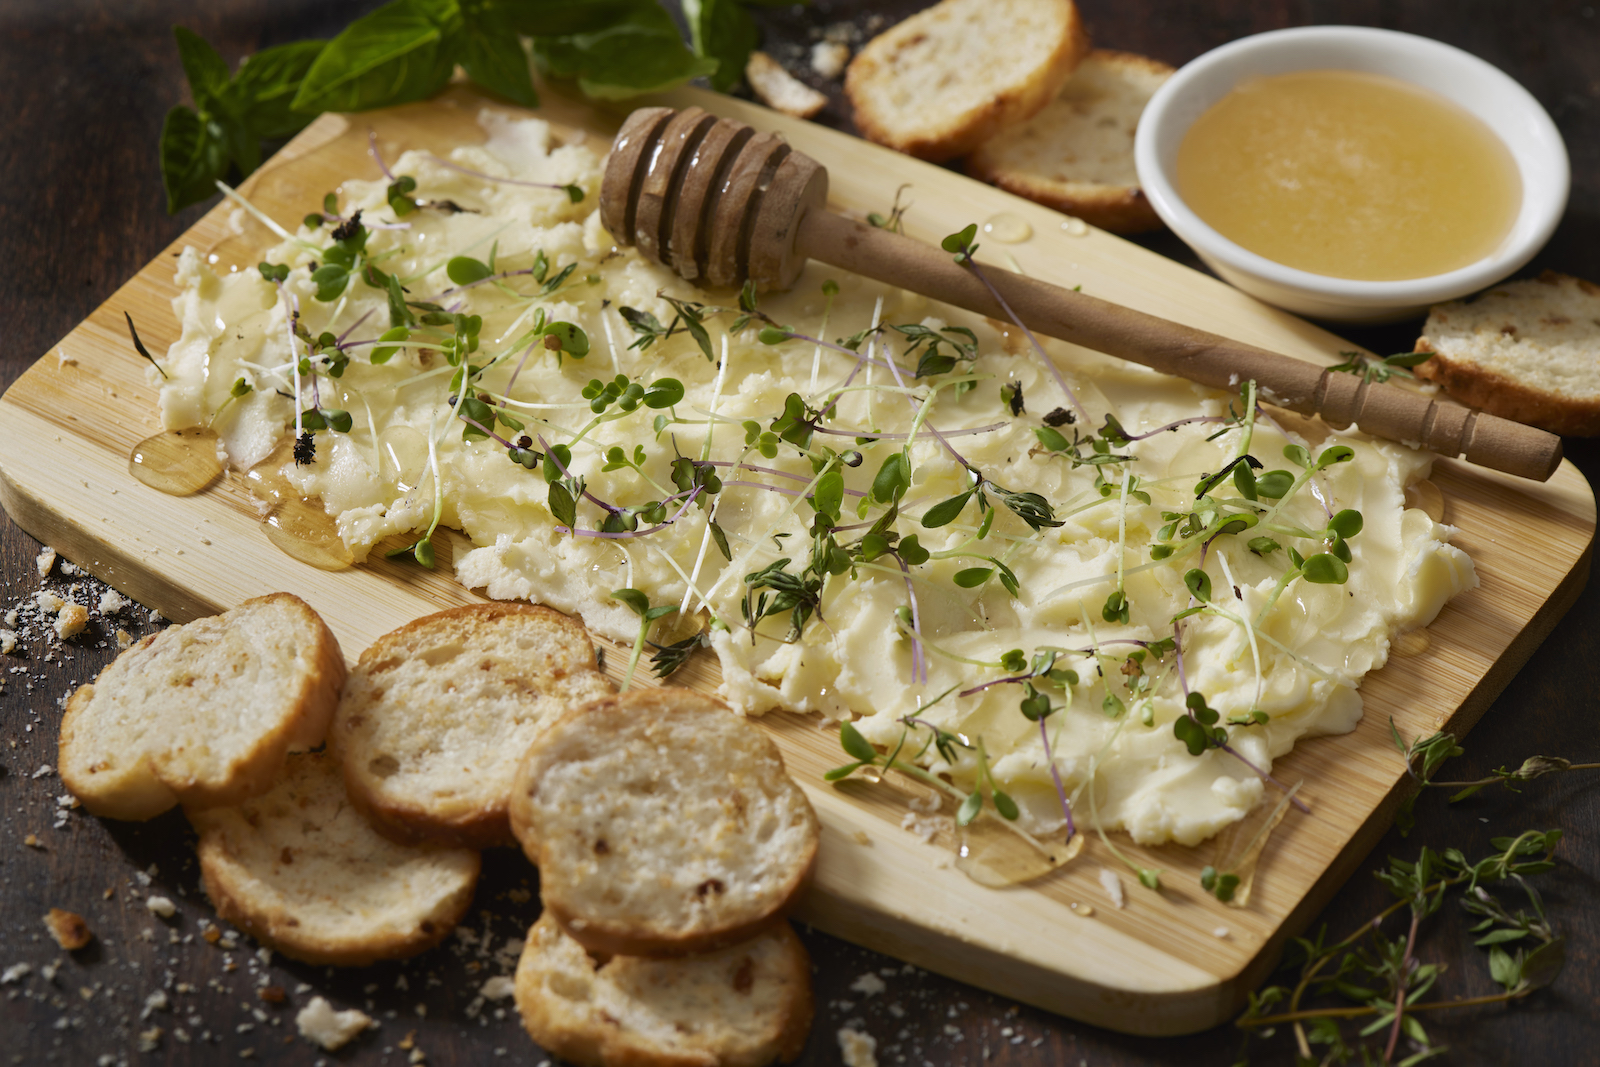 A wooden board covered with pats of butter and herbs